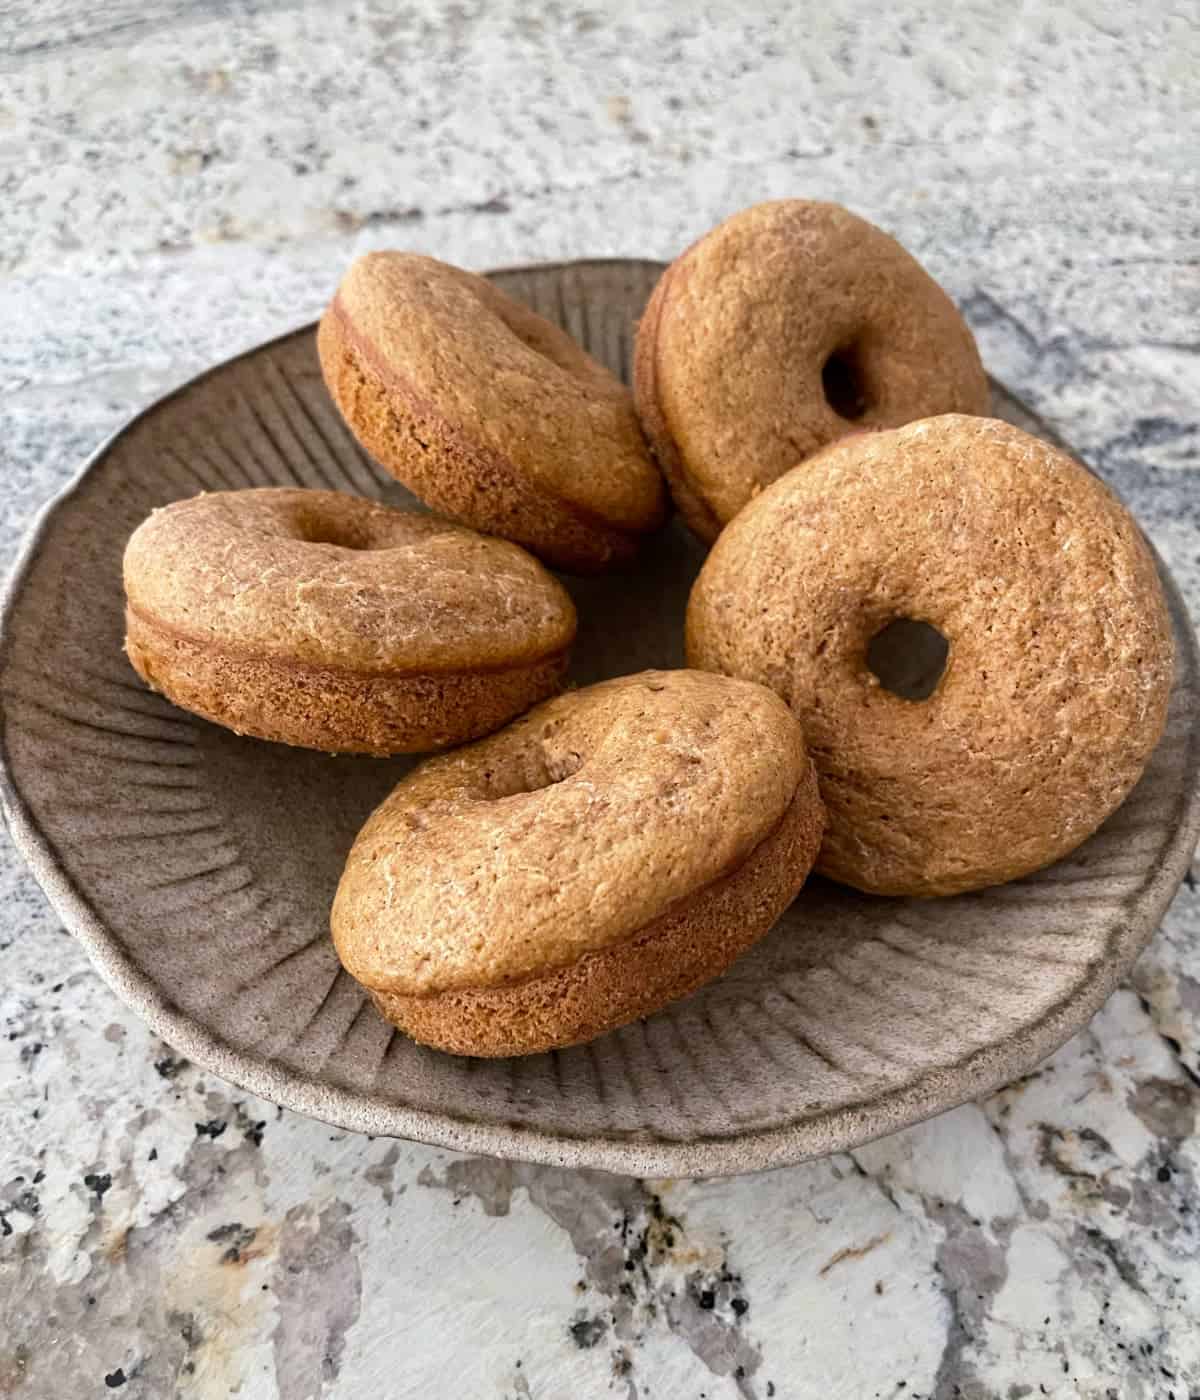 Healthy Baked Whole Wheat Donuts Recipe